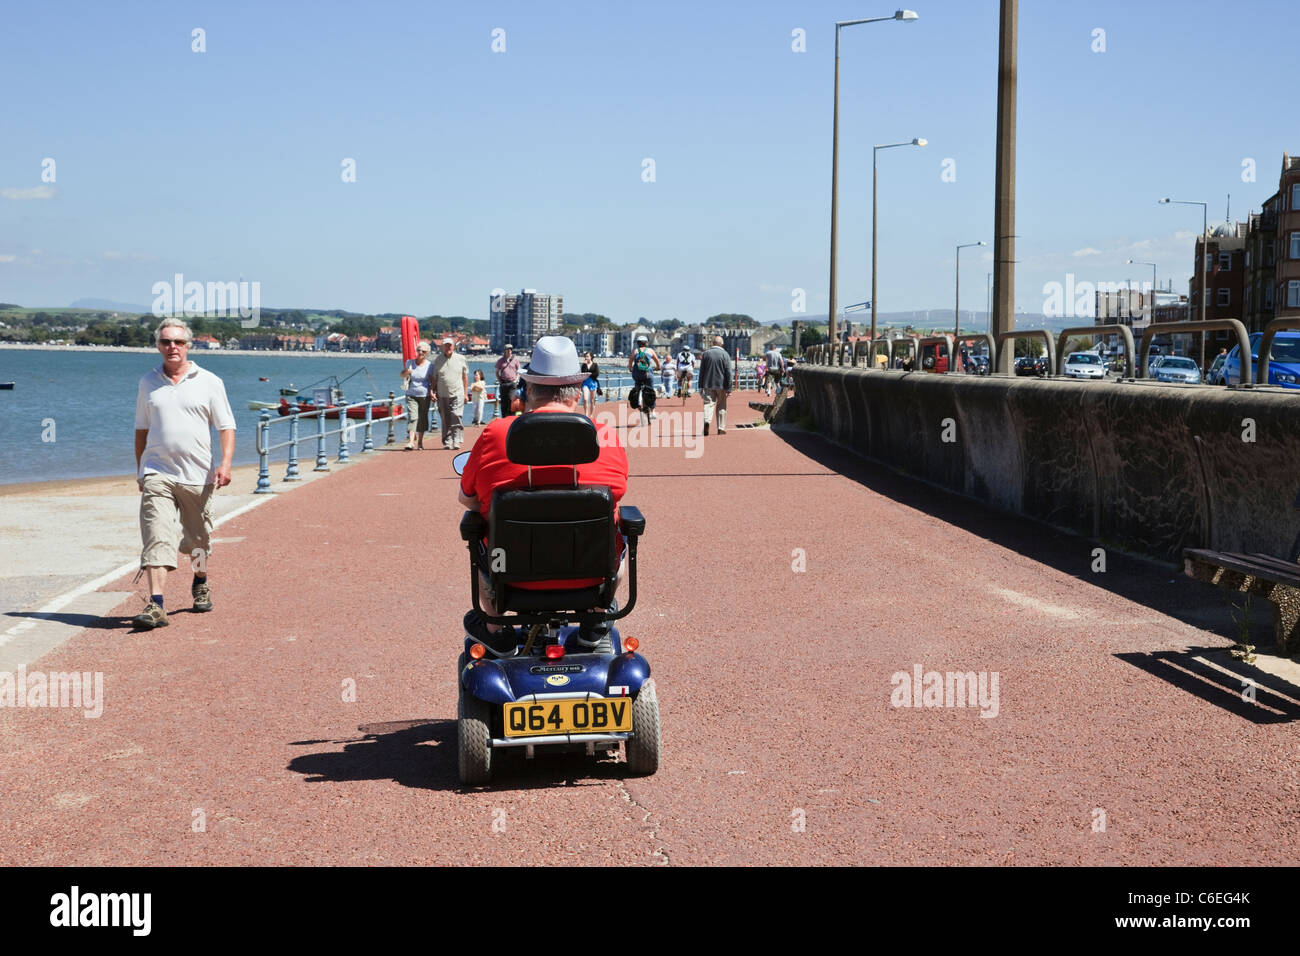 Senior man using a mobility scooter on the seafront promenade. Morecambe, Lancashire, England, UK, Britain Stock Photo